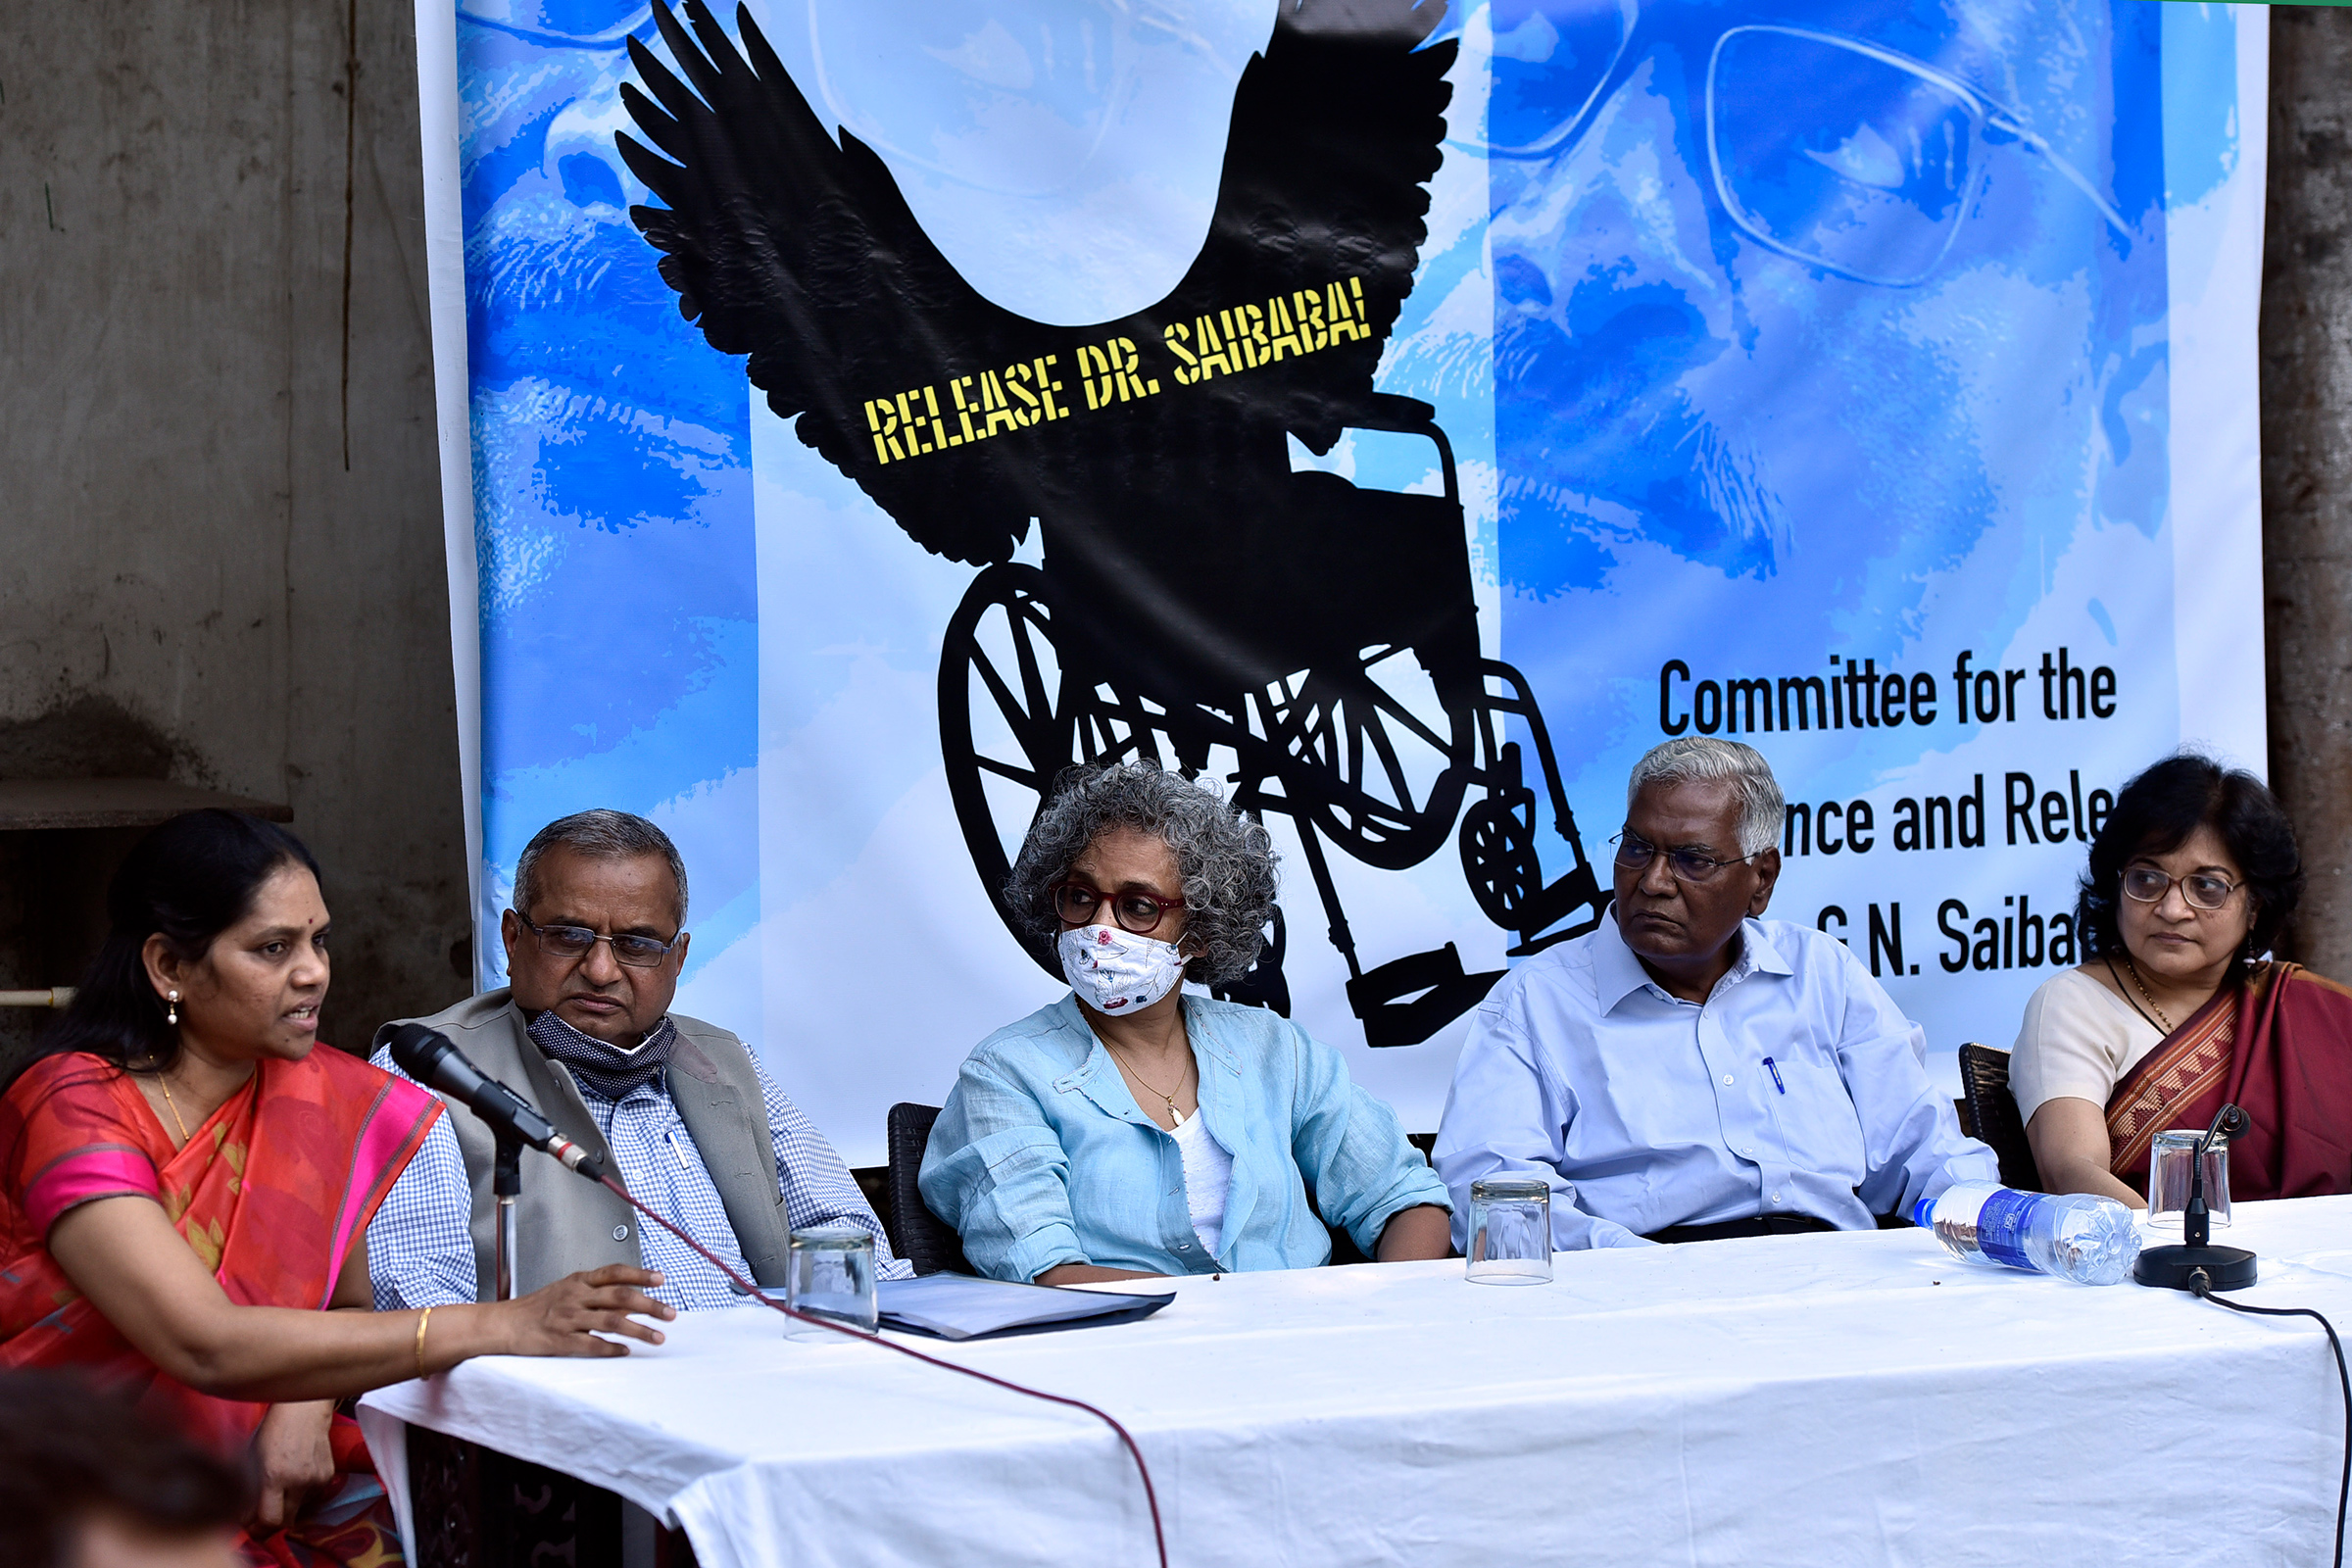 Senior advocate Prashant Bhushan, CPI leader D. Raja, author-activist Arundhati Roy, former DUSU President Nandita Narain, and others during a press conference demanding the immediate release of Saibaba on March 10, 2021 in New Delhi. (Sanjeev Verma—Hindustan Times/Getty Images)